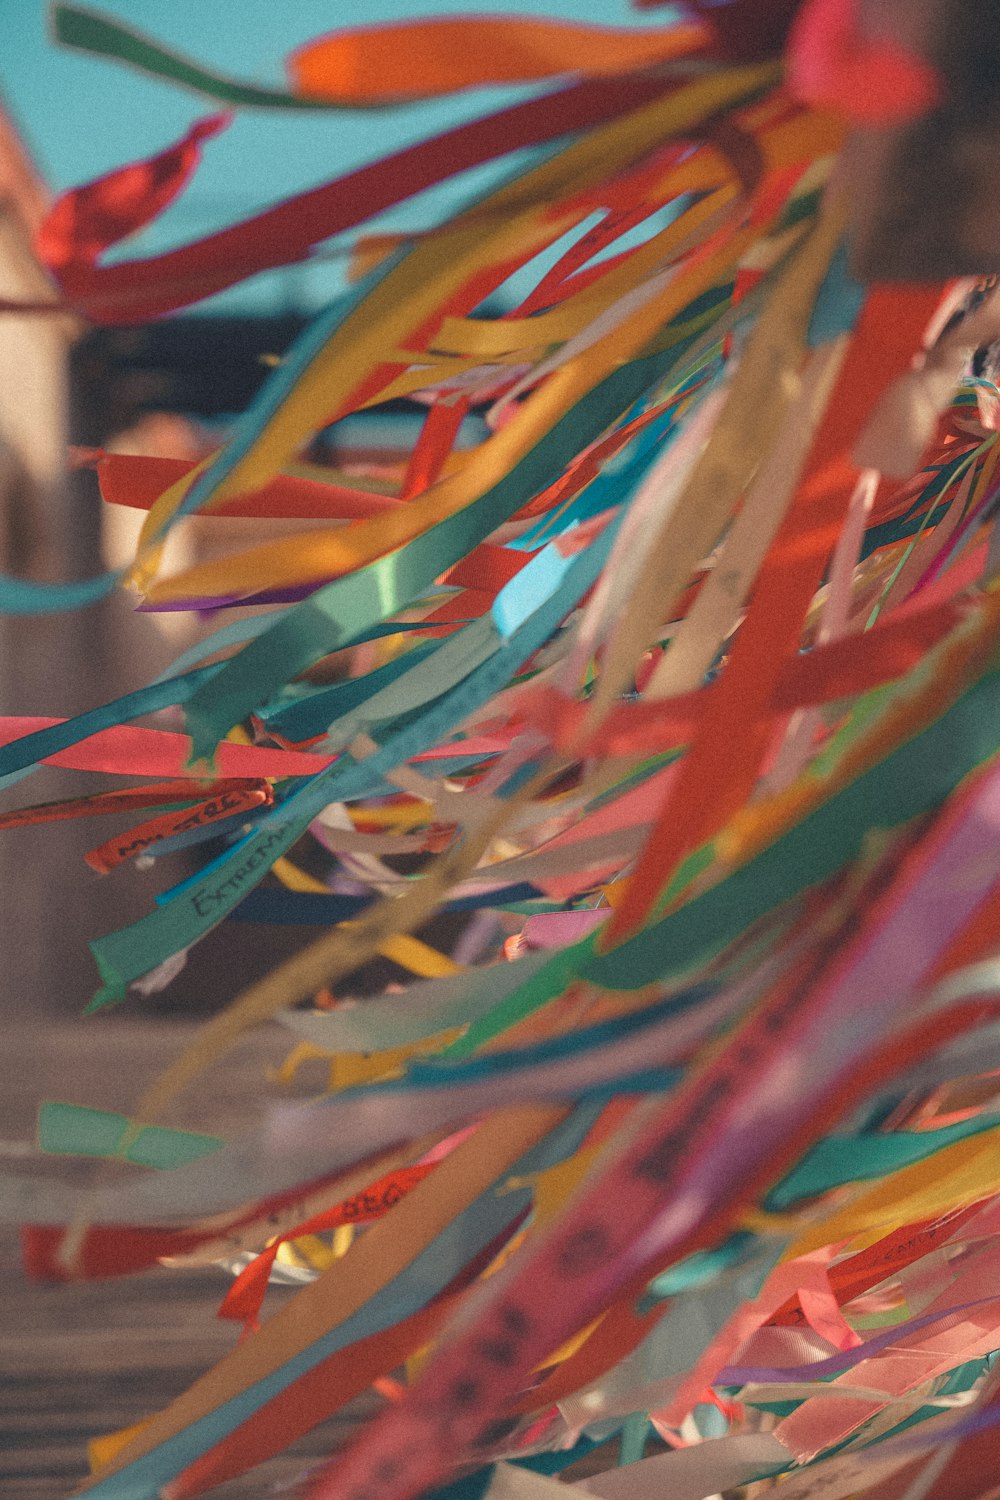 a bunch of colorful streamers hanging from a ceiling